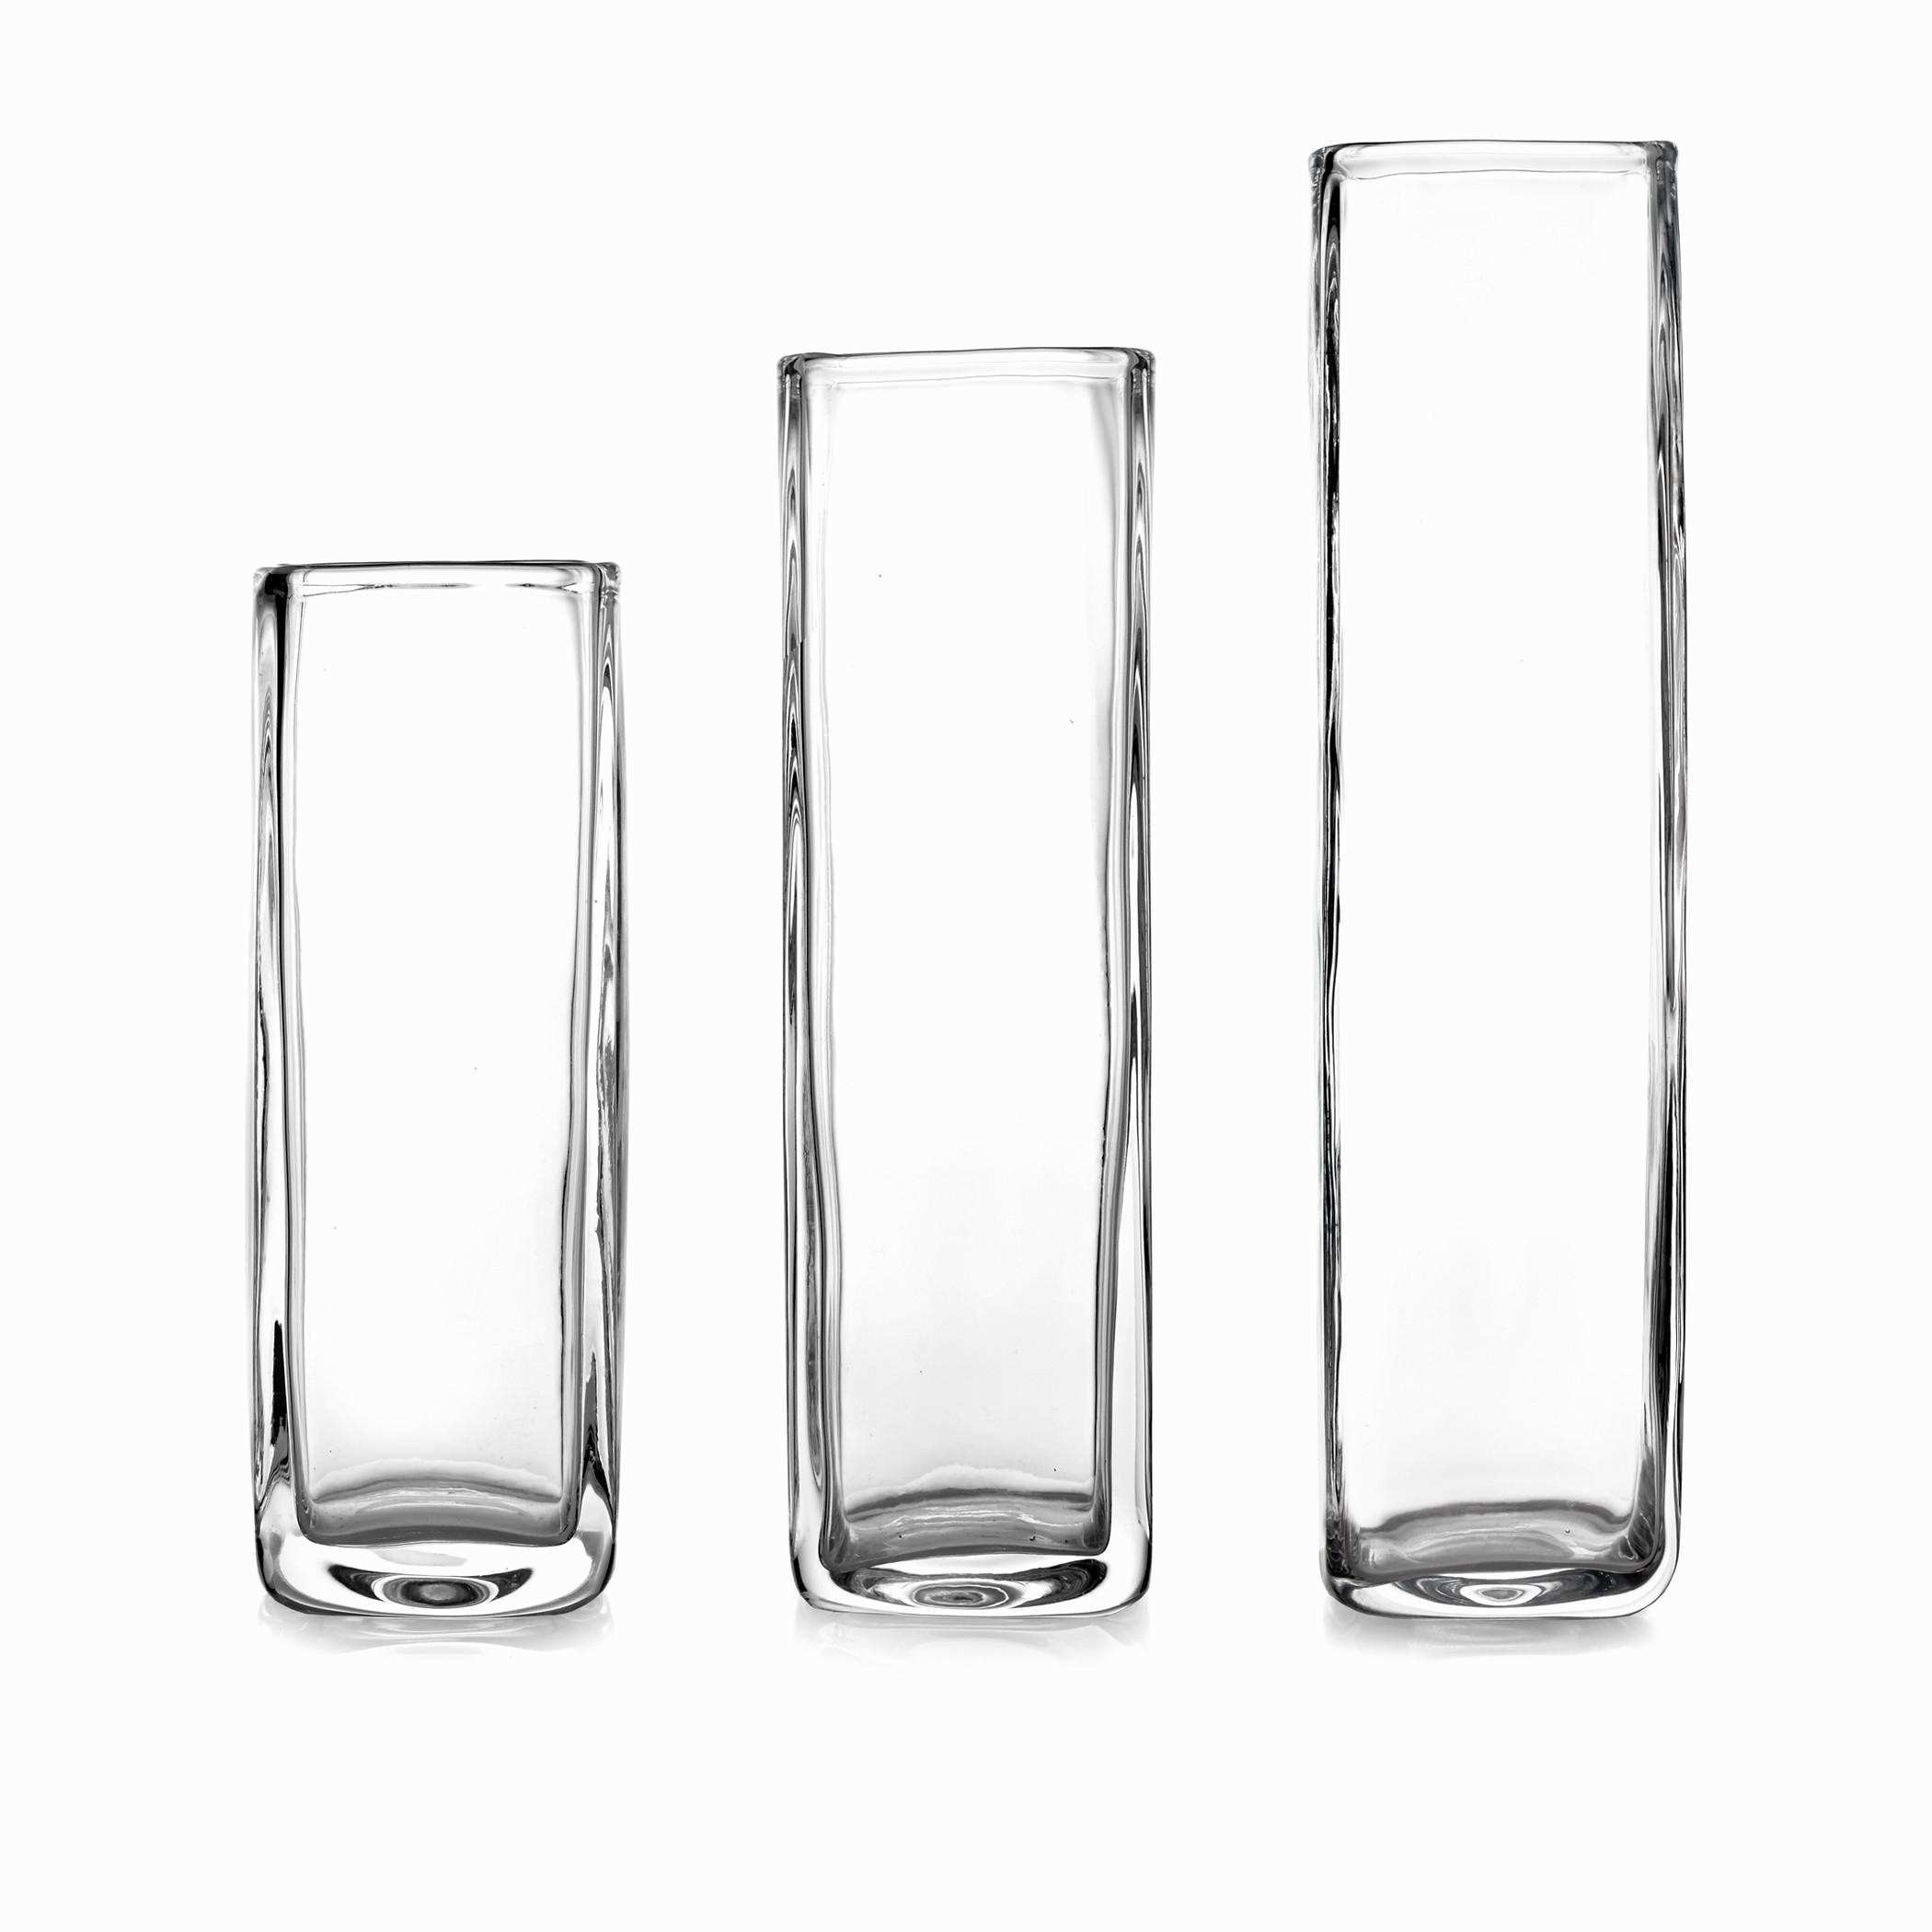 26 Ideal Large Cylinder Vases wholesale 2024 free download large cylinder vases wholesale of black glass vases photos living room vase glass lovely cheap glass within black glass vases images glass wedding centerpieces inspirational living room tall